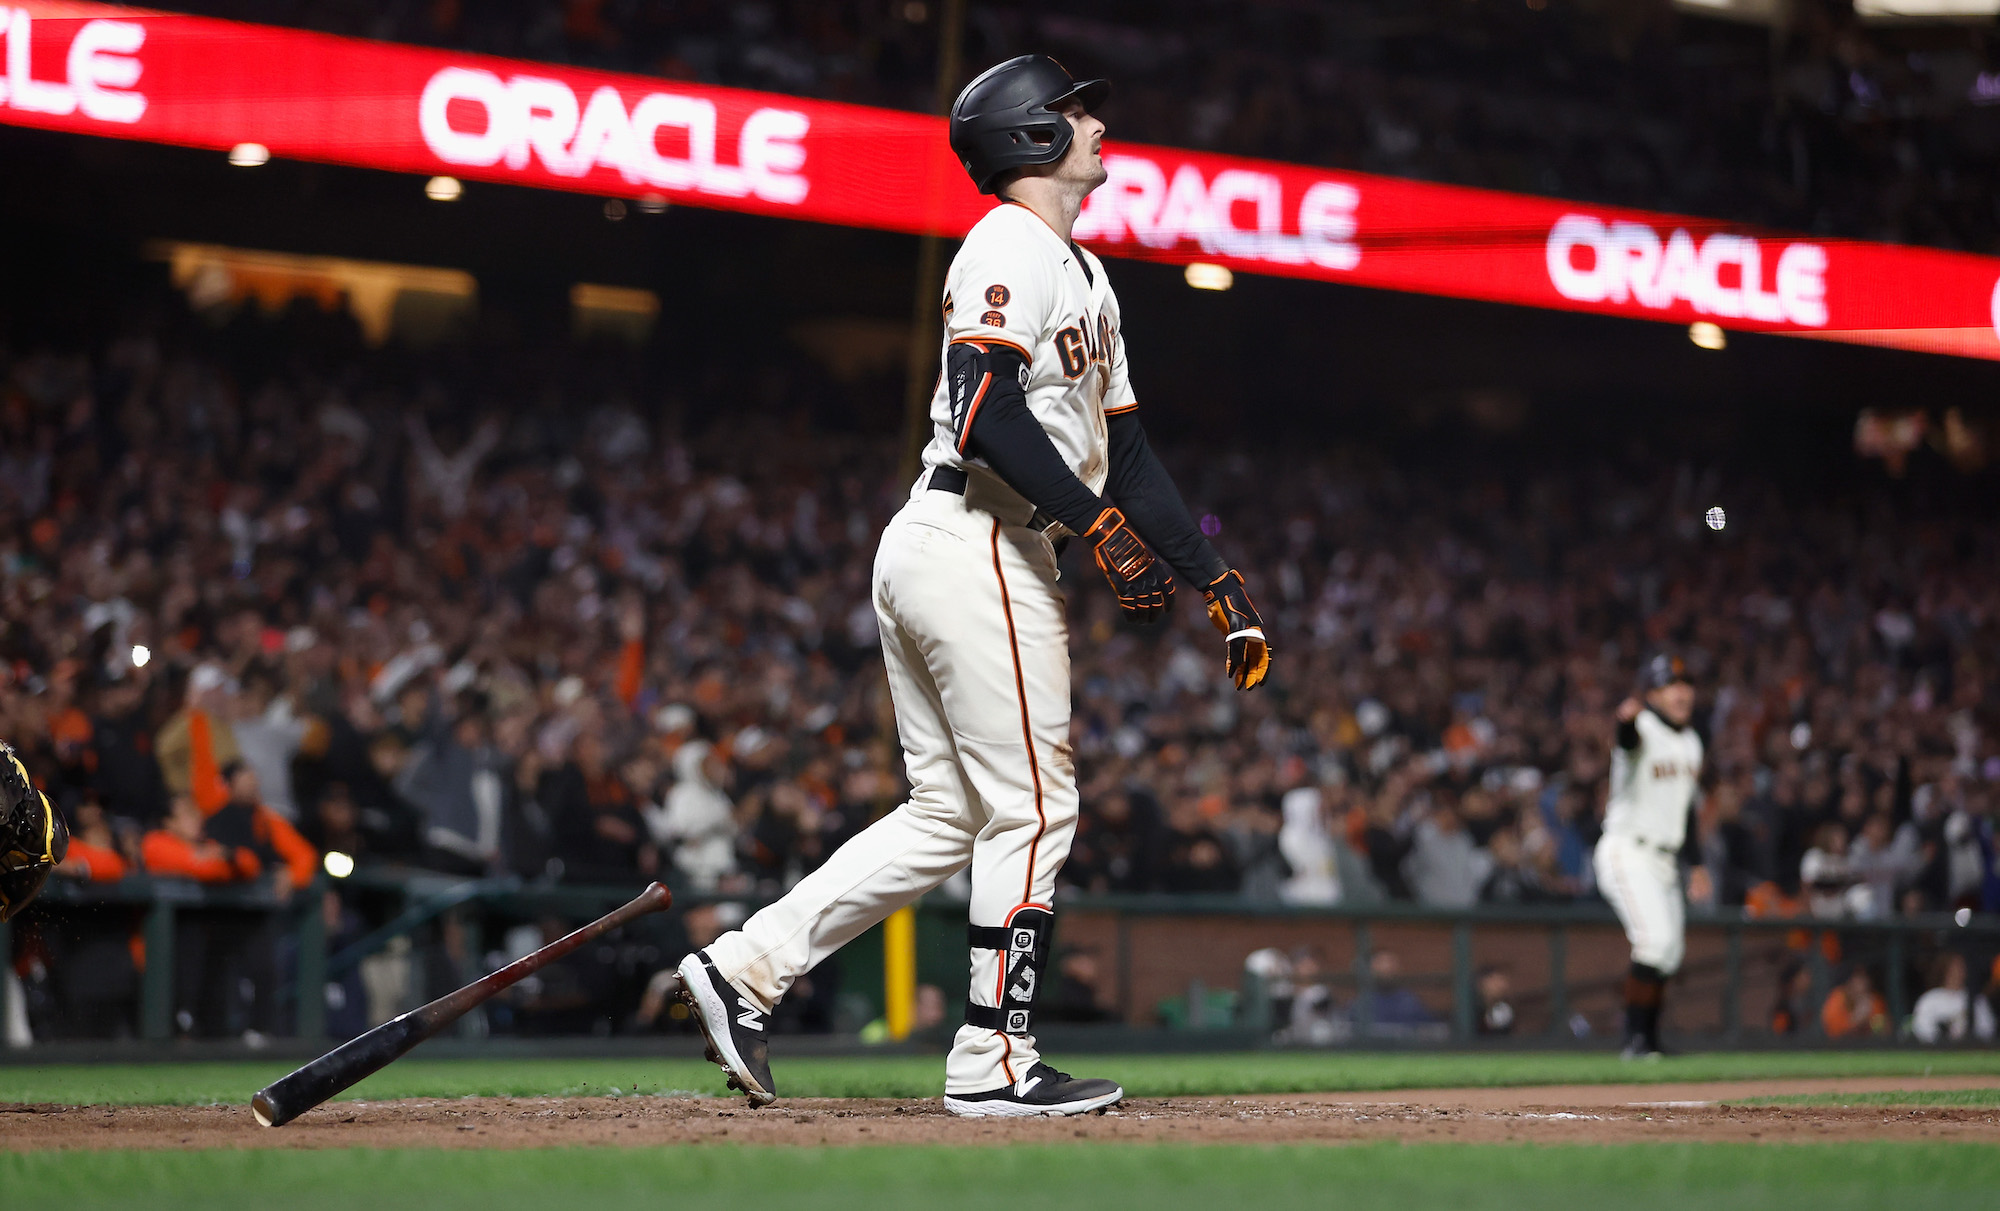 SAN FRANCISCO, CALIFORNIA - JUNE 19: Mike Yastrzemski #5 of the San Francisco Giants hits a walk-off three-run home run in the bottom of the tenth inning to defeat the San Diego Padres at Oracle Park on June 19, 2023 in San Francisco, California. (Photo by Lachlan Cunningham/Getty Images)